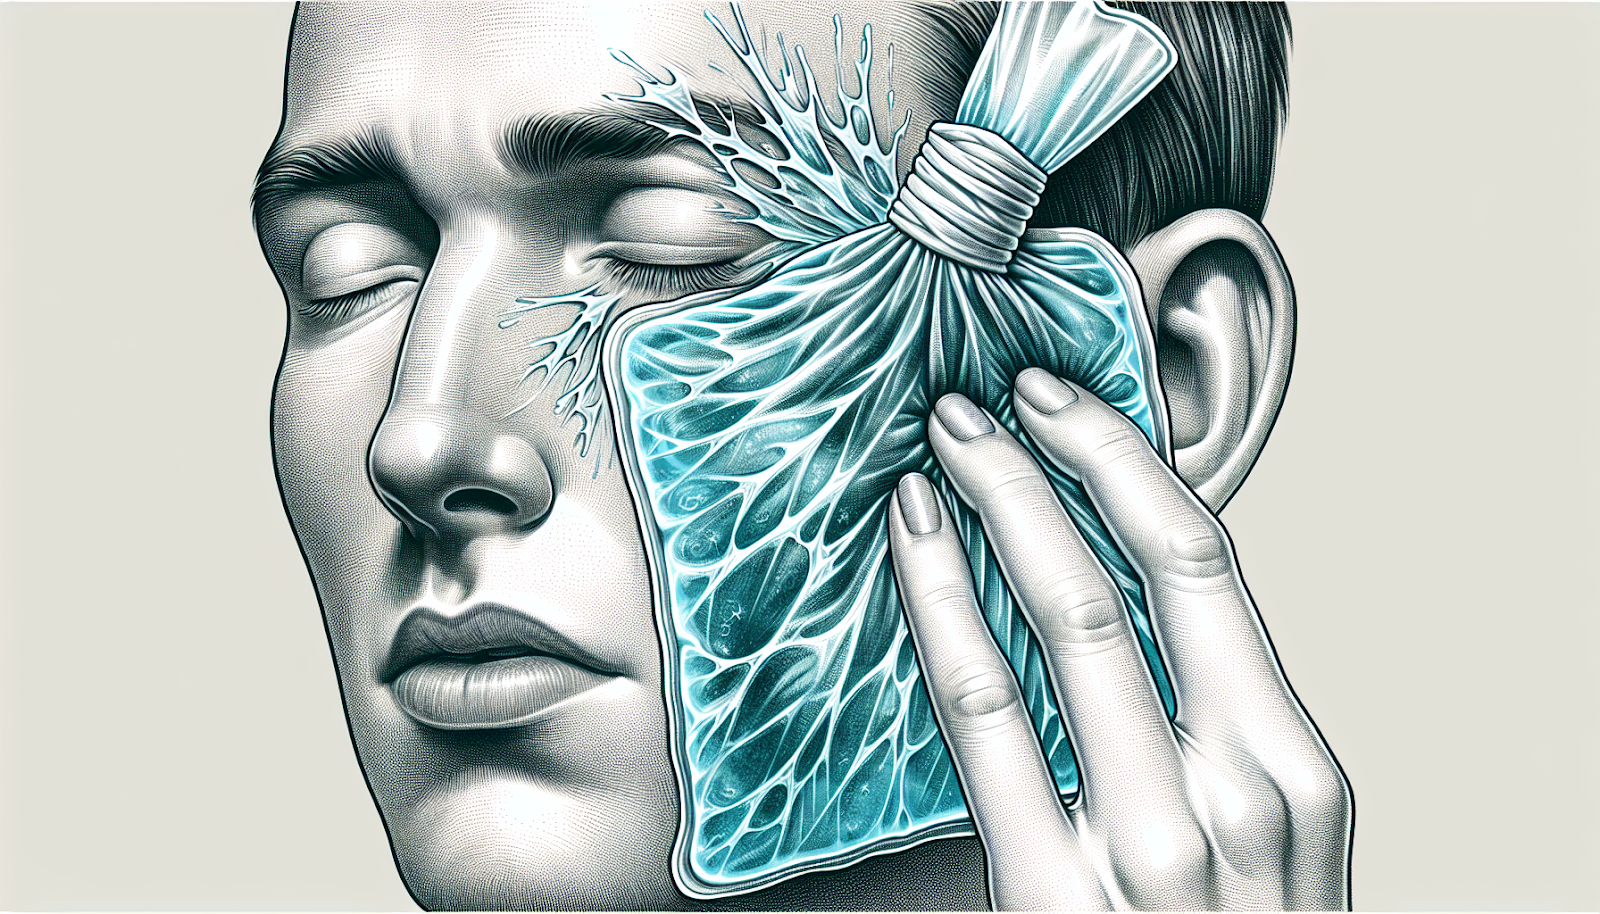 Illustration of applying a cold compress